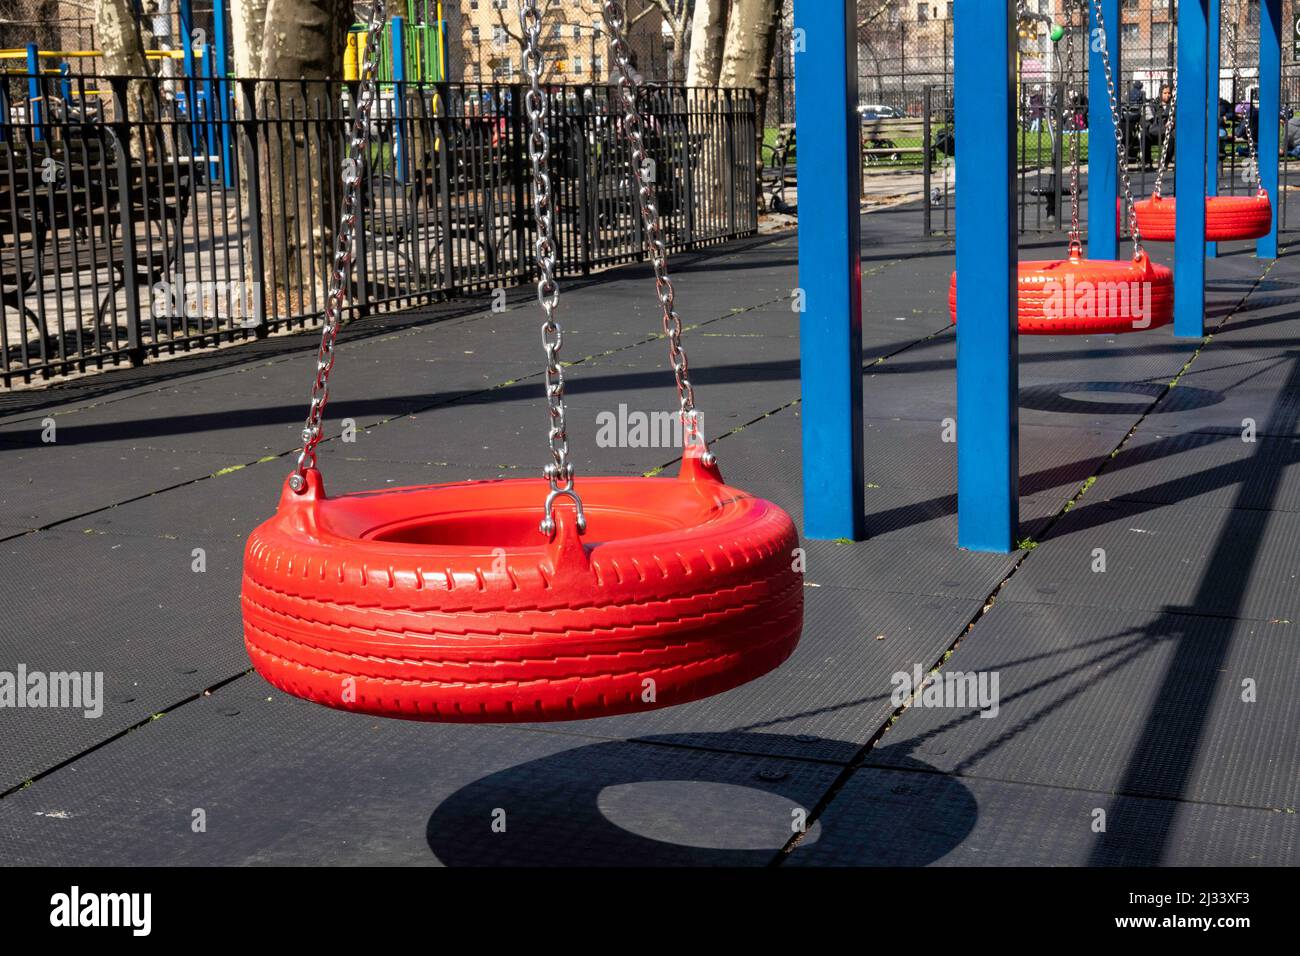 St. Varten Park has a public playground and is located above the Midtown Tunnel in New York City, USA  2022 Stock Photo